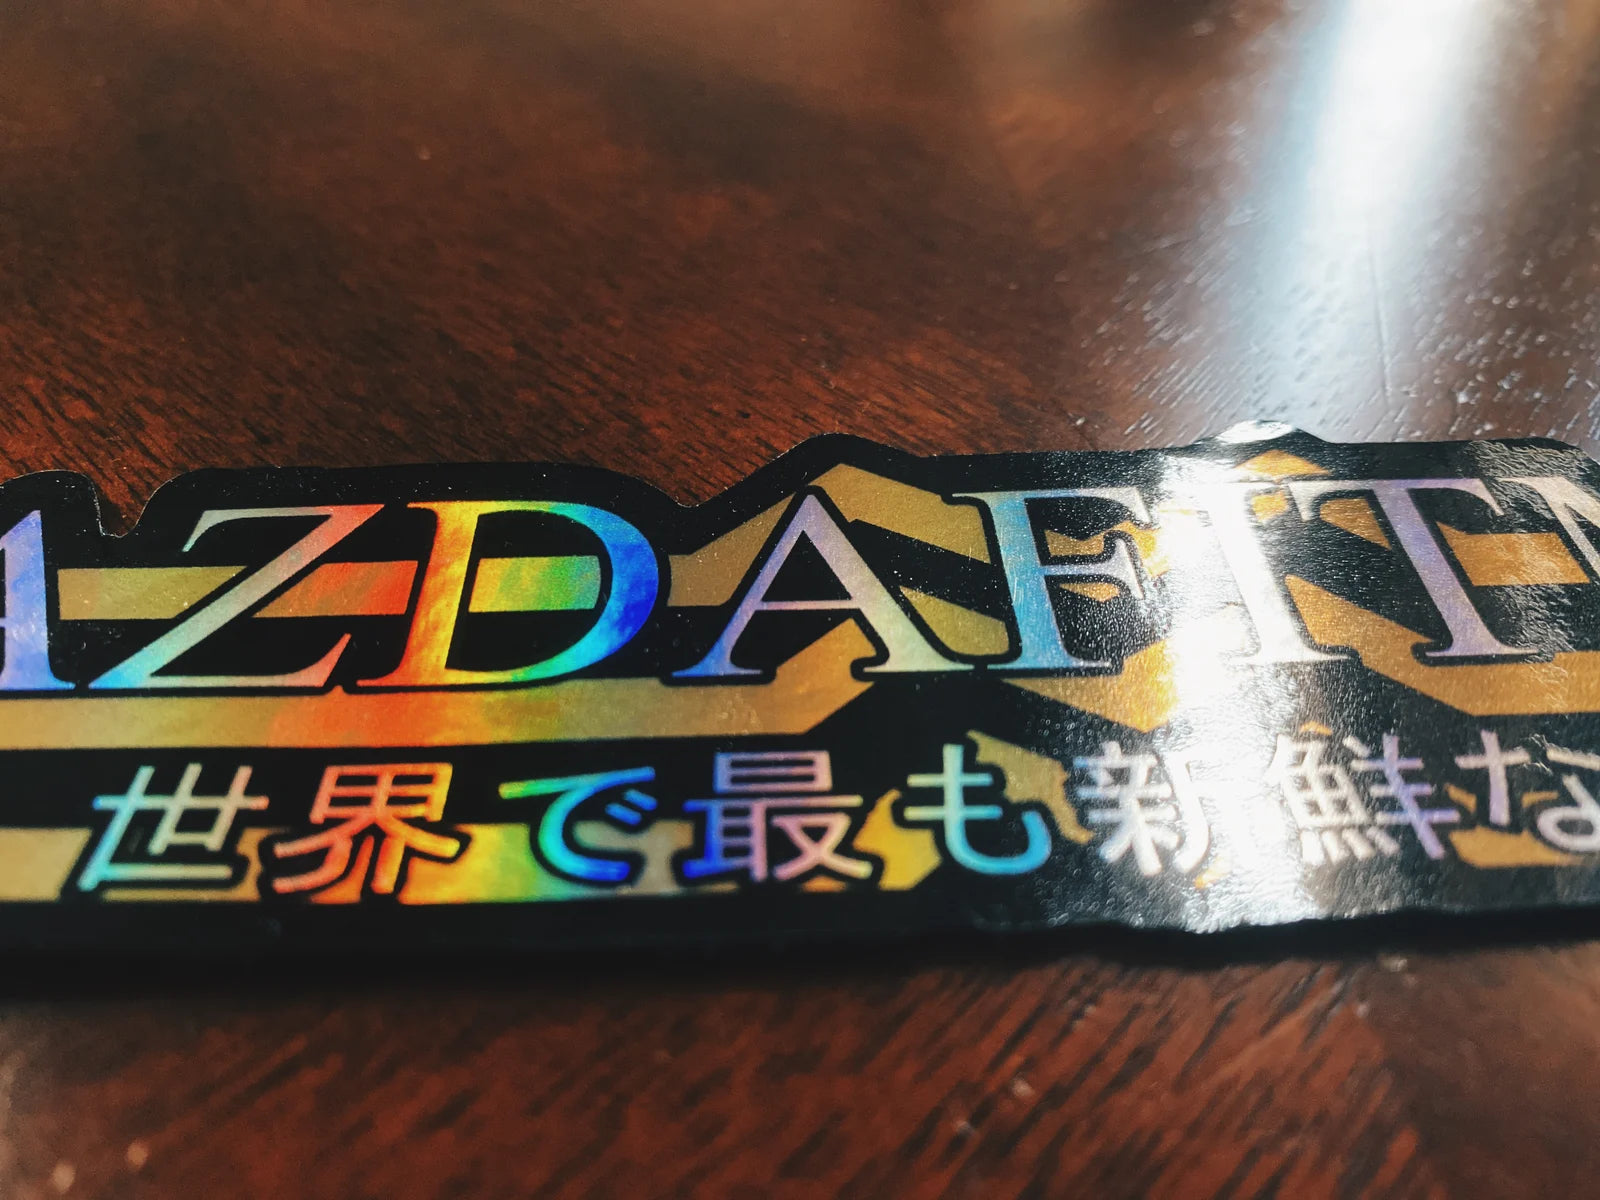 MAZDA FITMENT WING STICKER - SPECIAL HOLOGRAPHIC VER.